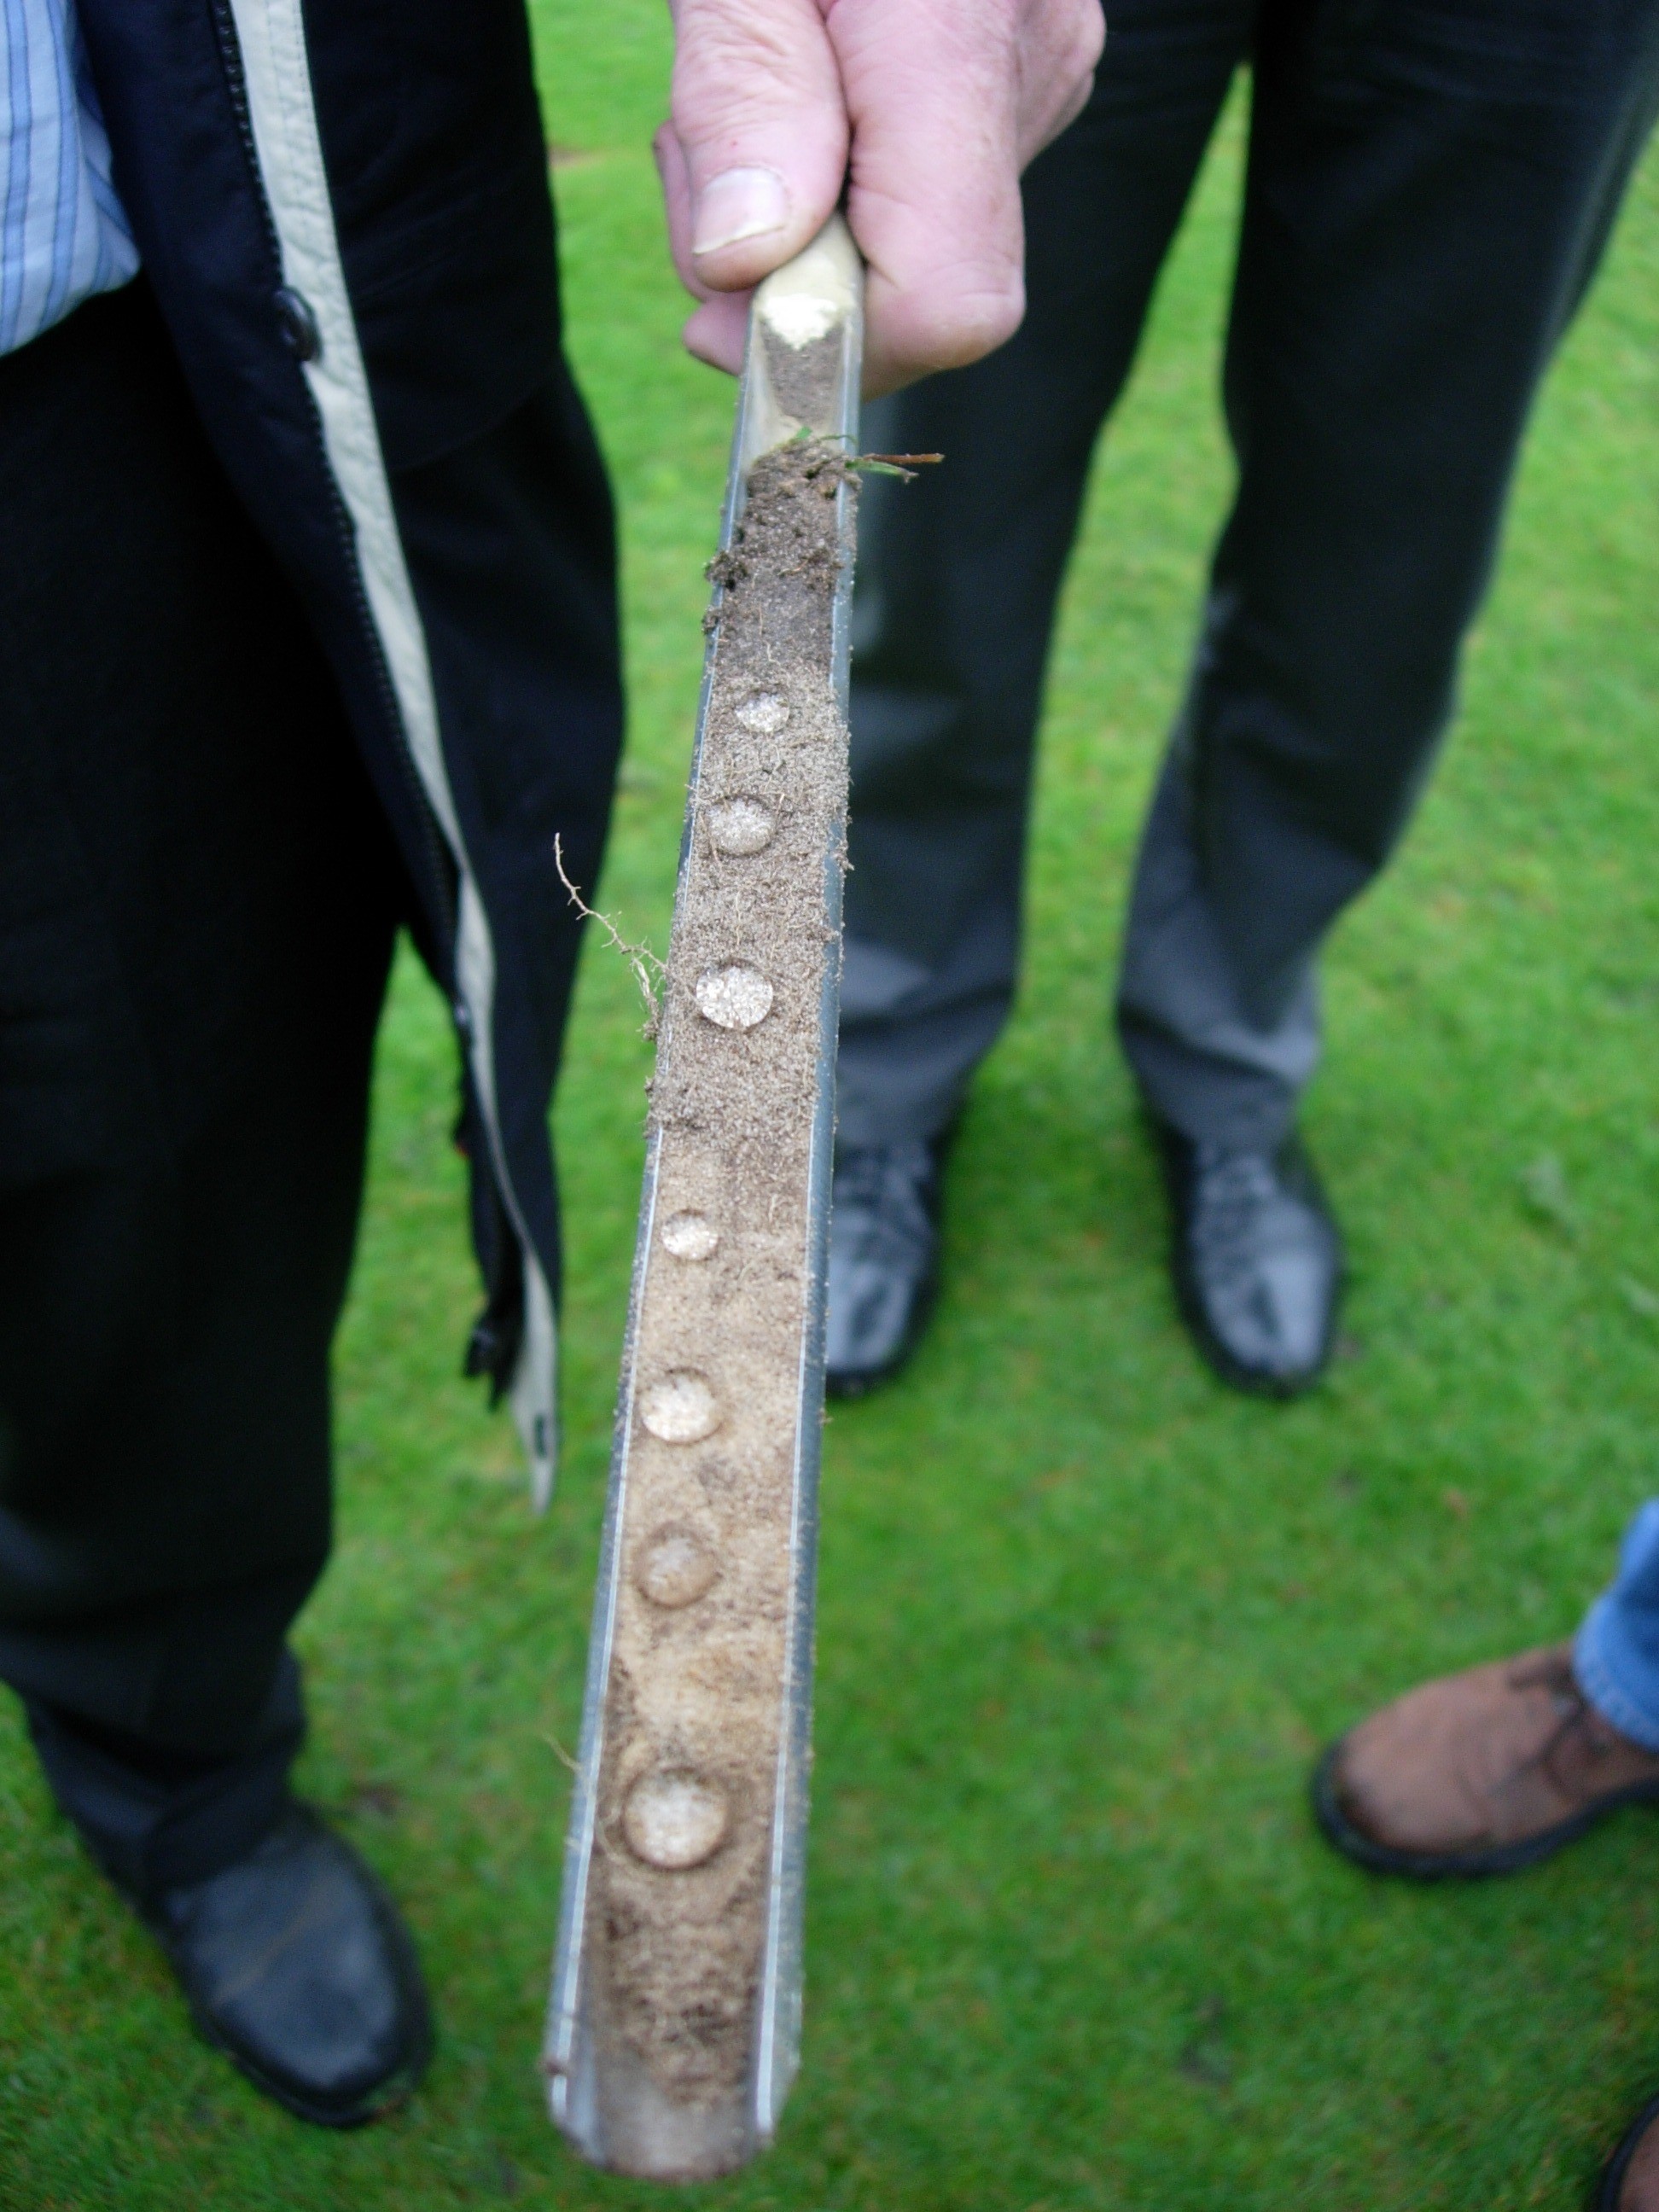 picture of soil sample showing water droplets on top